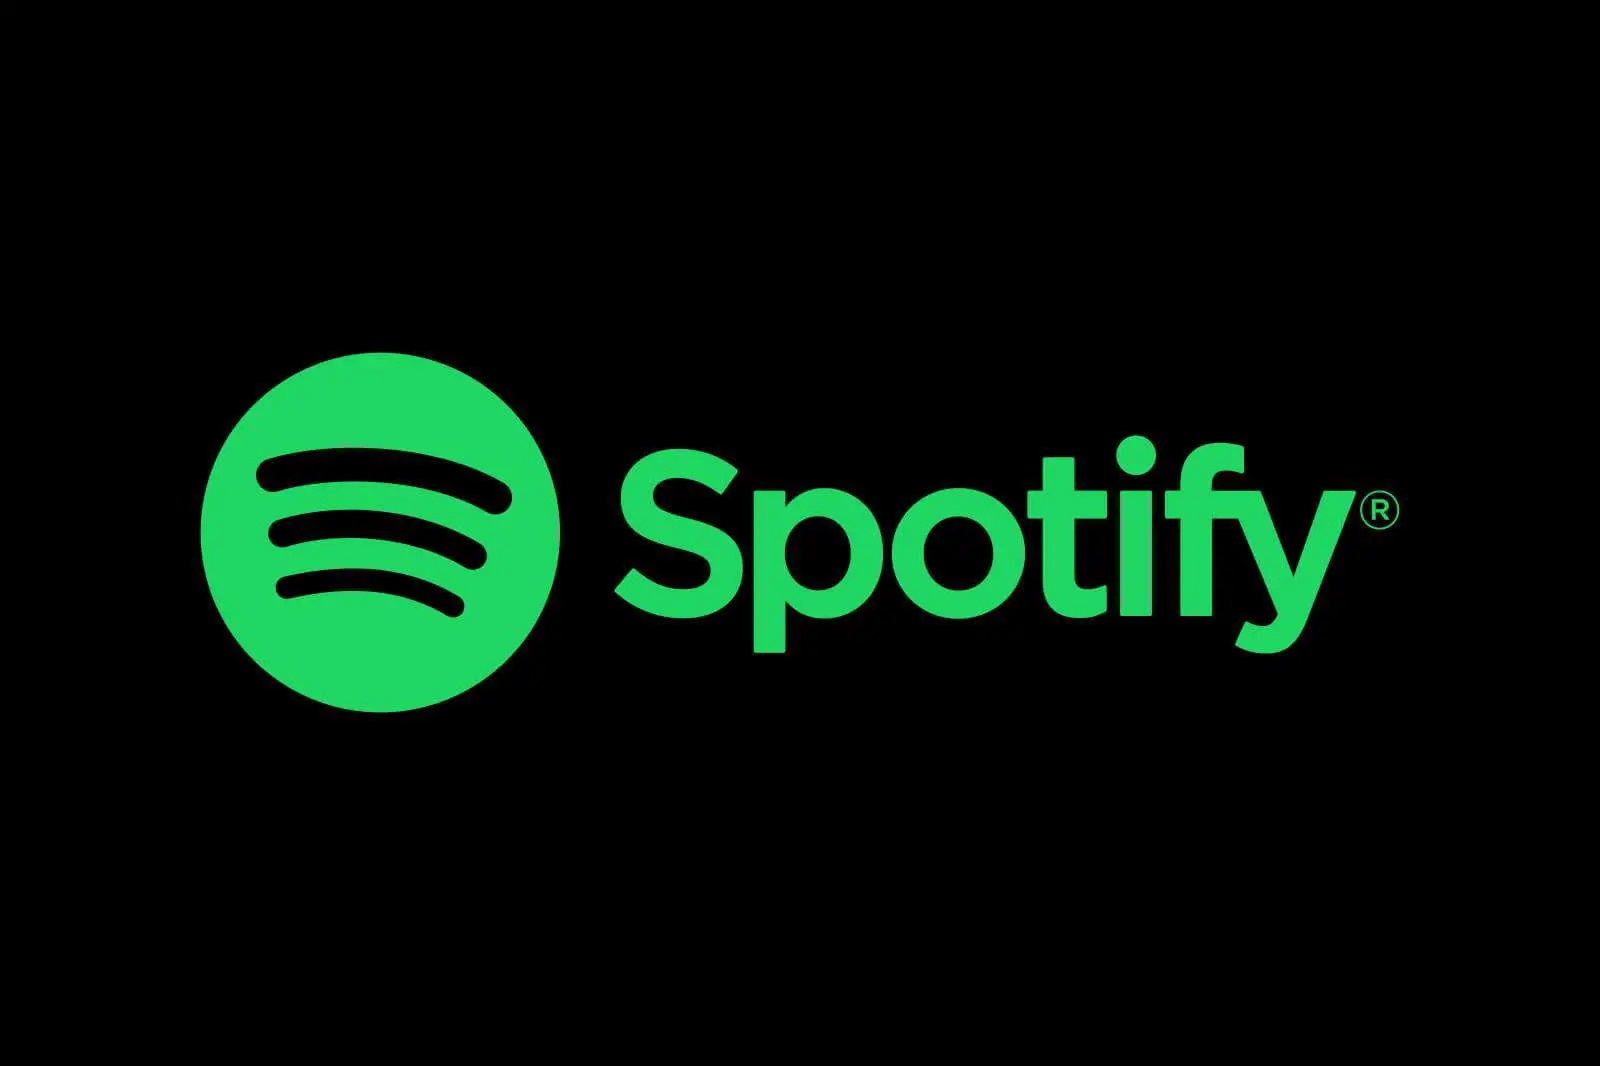 spotify-announces-royalty-model-changes-to-benefit-artists-with-1-billion-over-five-years